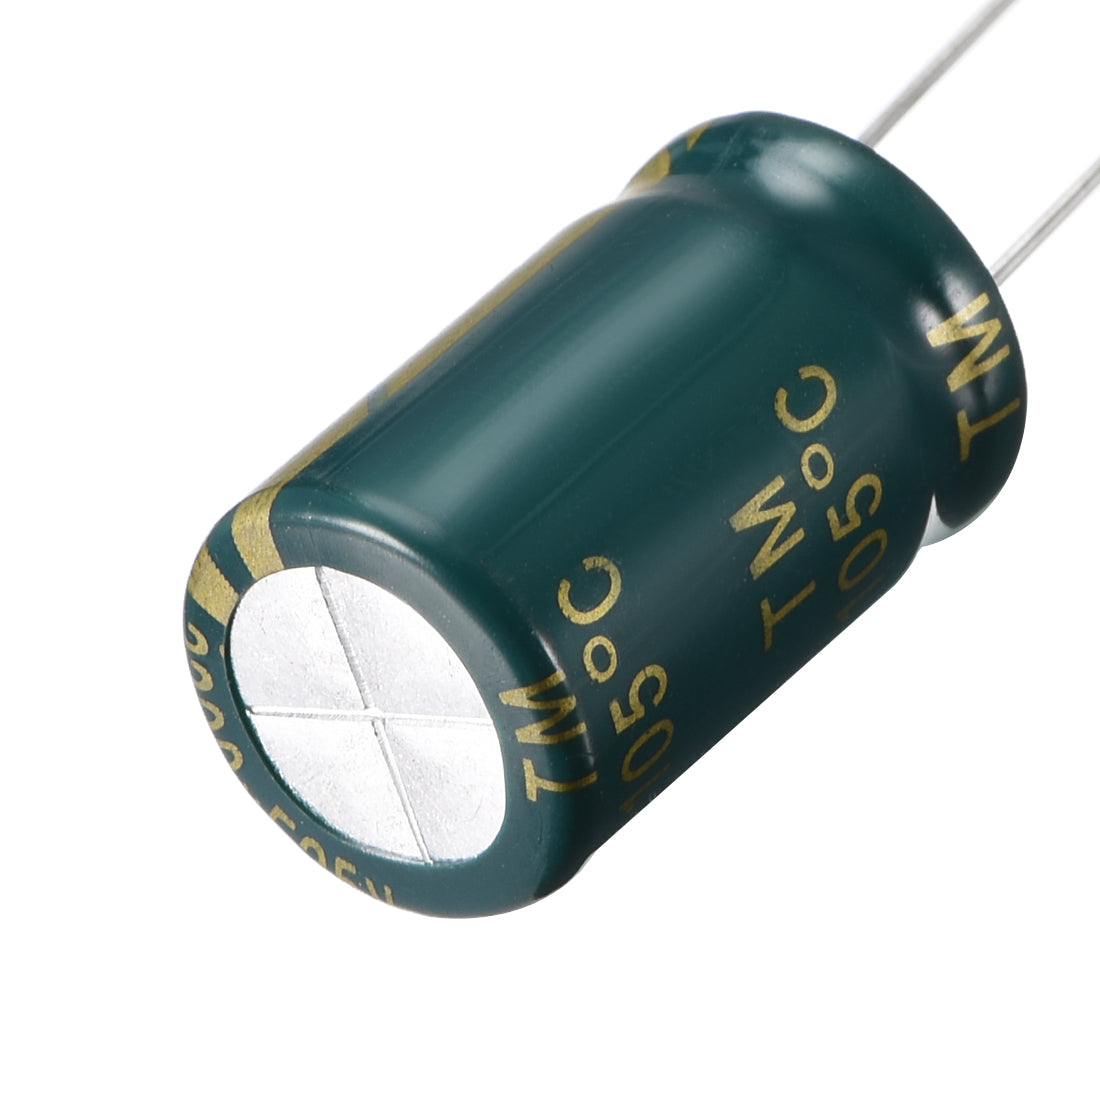 uxcell Uxcell Aluminum Radial Electrolytic Capacitor Low ESR Green with 2200UF 25V 105 Celsius Life 3000H 13 x 21 mm High Ripple Current,Low Impedance 20pcs